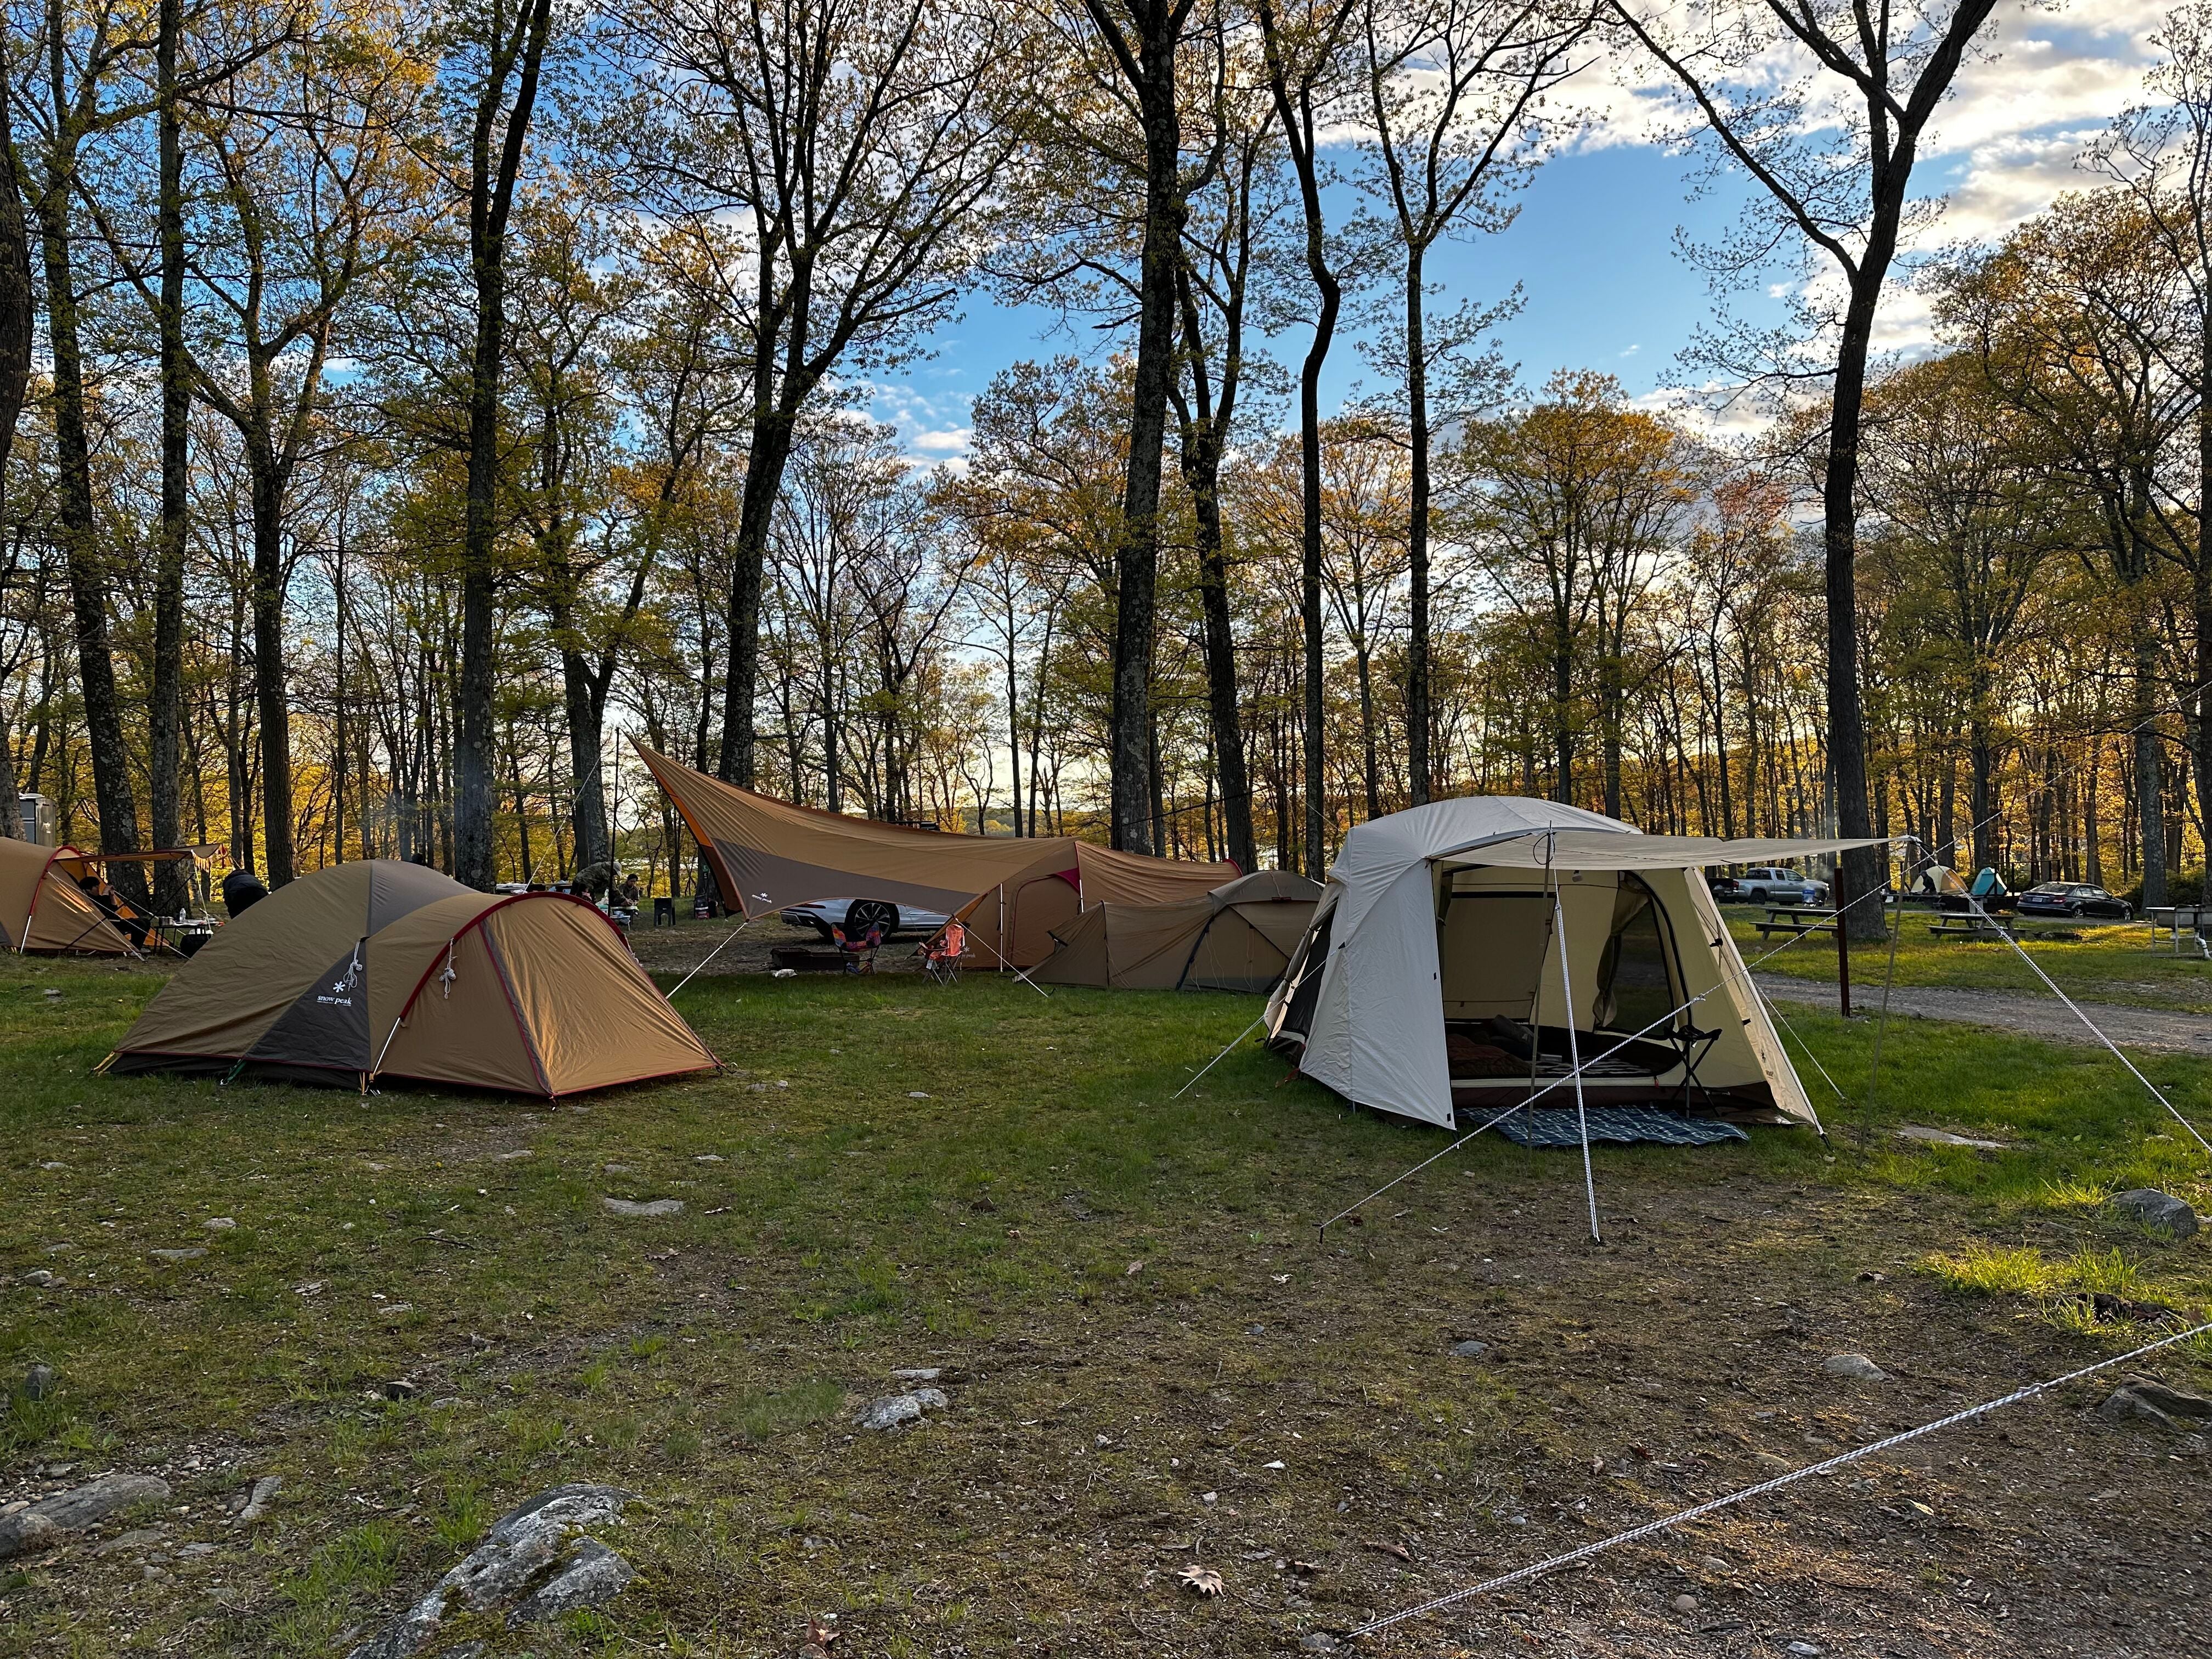 Camping scene showing two tents from a Snow Peak Brooklyn Campout